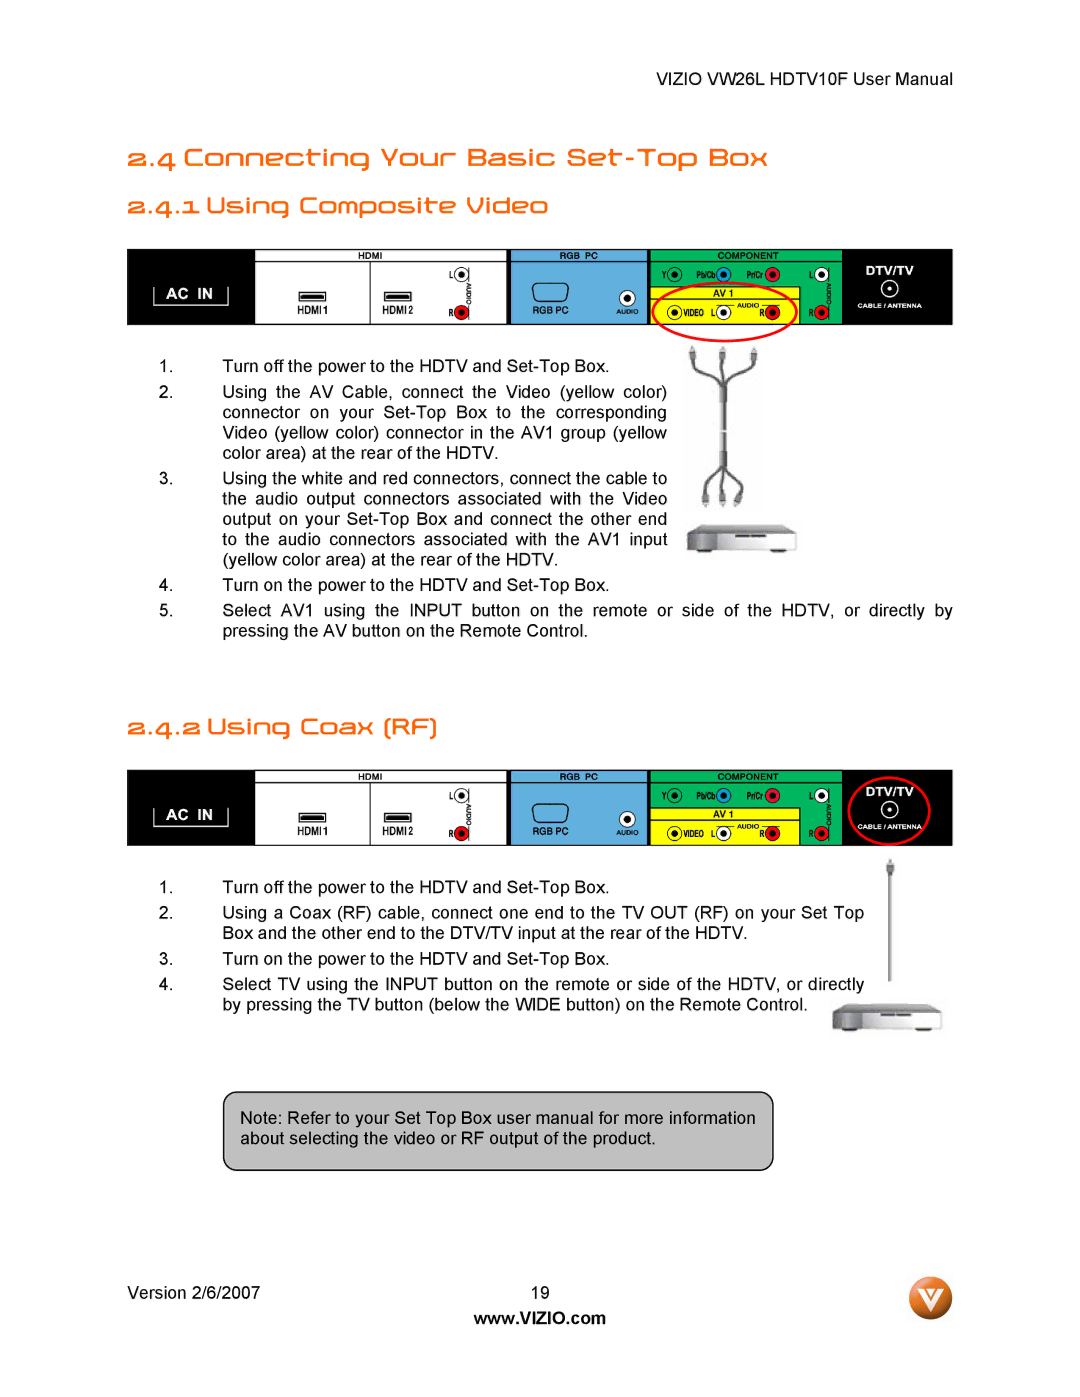 Vizio VW26L user manual Connecting Your Basic Set-Top Box, Using Composite Video, Using Coax RF 